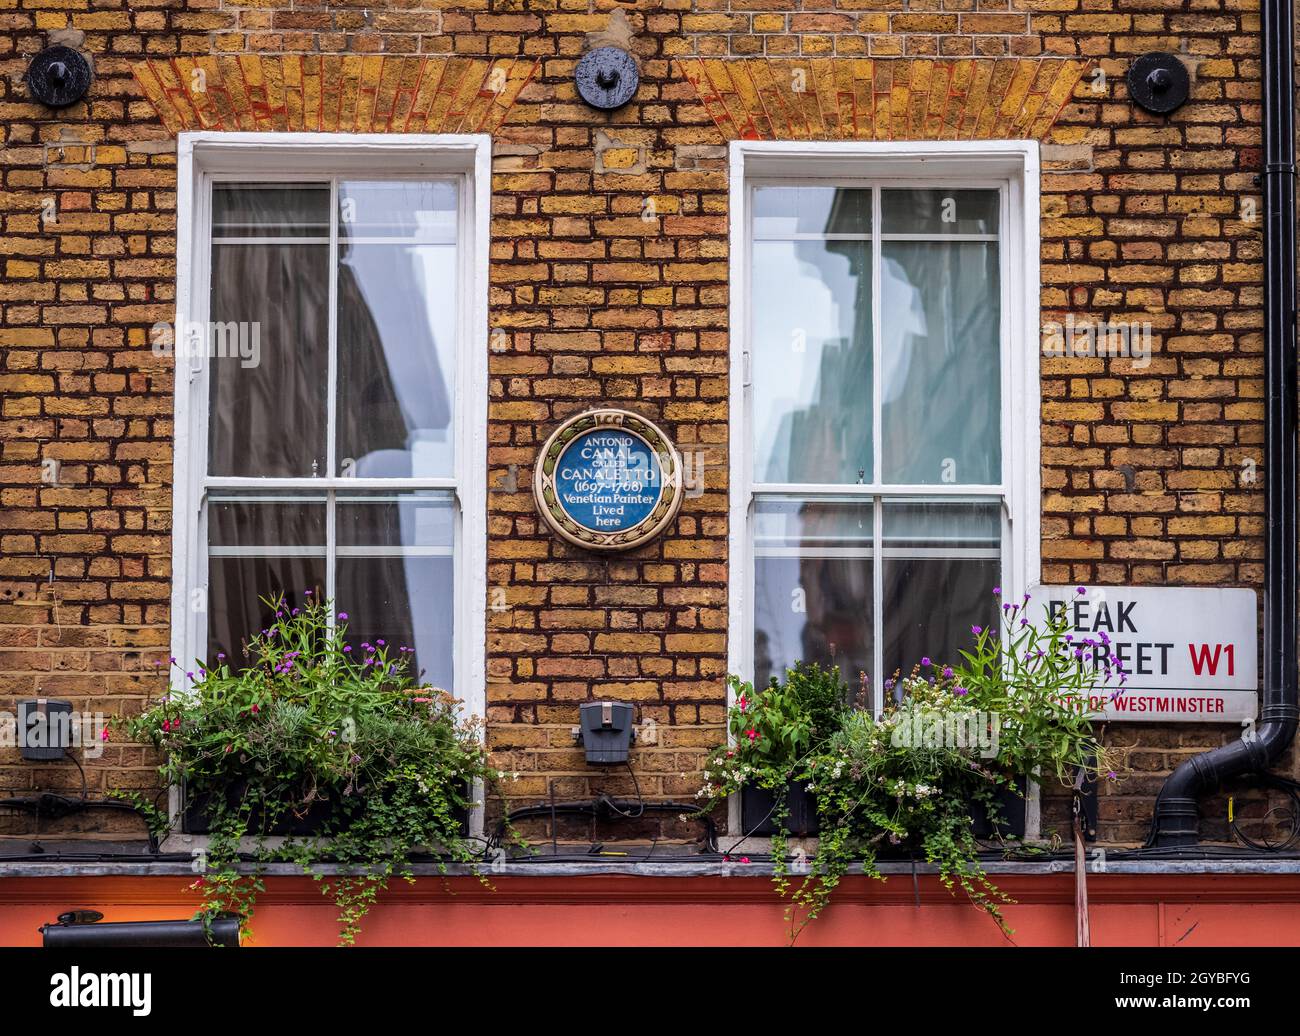 Canaletto Blue Plaque 41 Beak St London - ANTONIO CANAL CALLED CANALETTO (1697-1768) Venetian Painter Lived here - erected by LCC 1925. Stock Photo